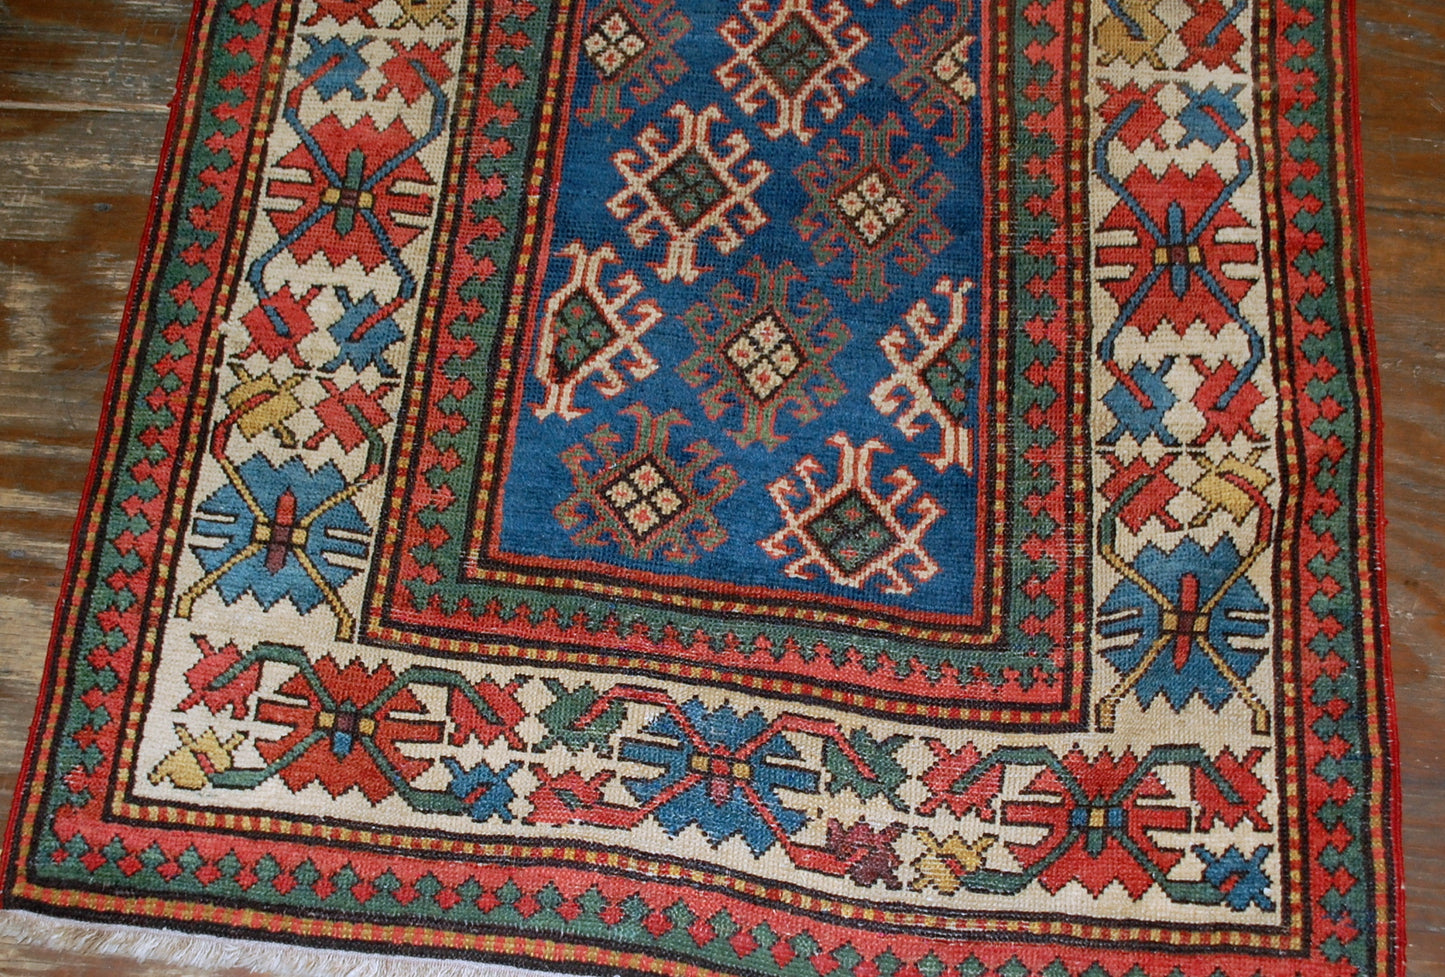 Antique handmade Caucasian Gendje rug in good condition. The rug is from the end of 19th century, made in Russia.